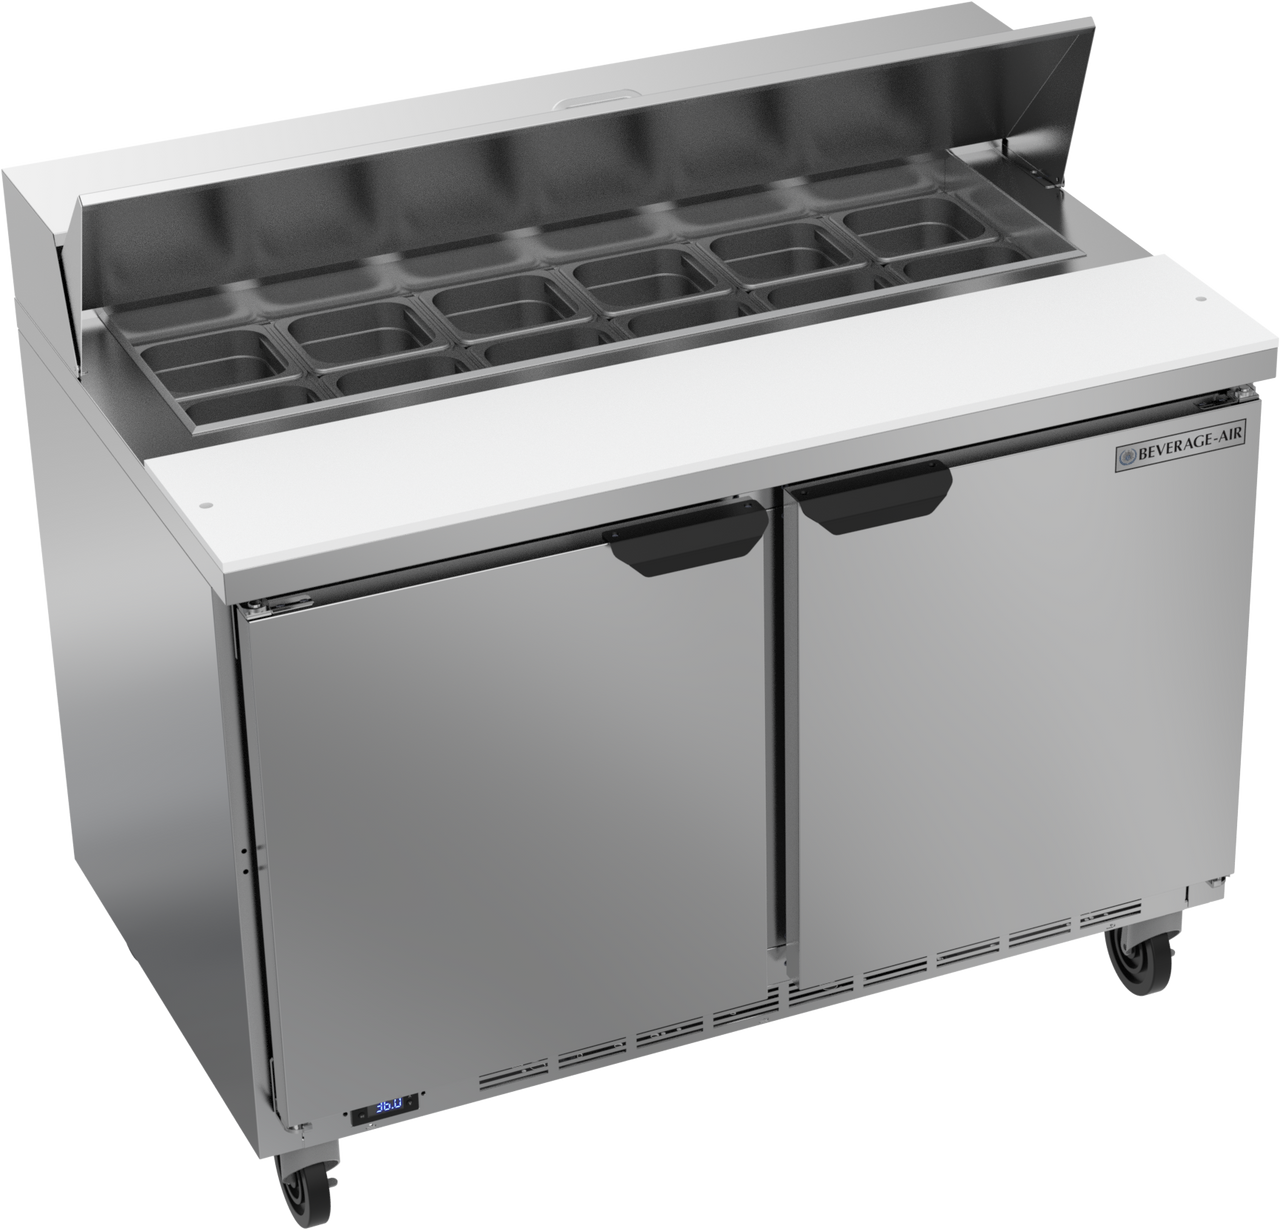 Beverage-Air SPE48HC-12 48" Two Door Refrigerated Sandwich / Salad Prep Table